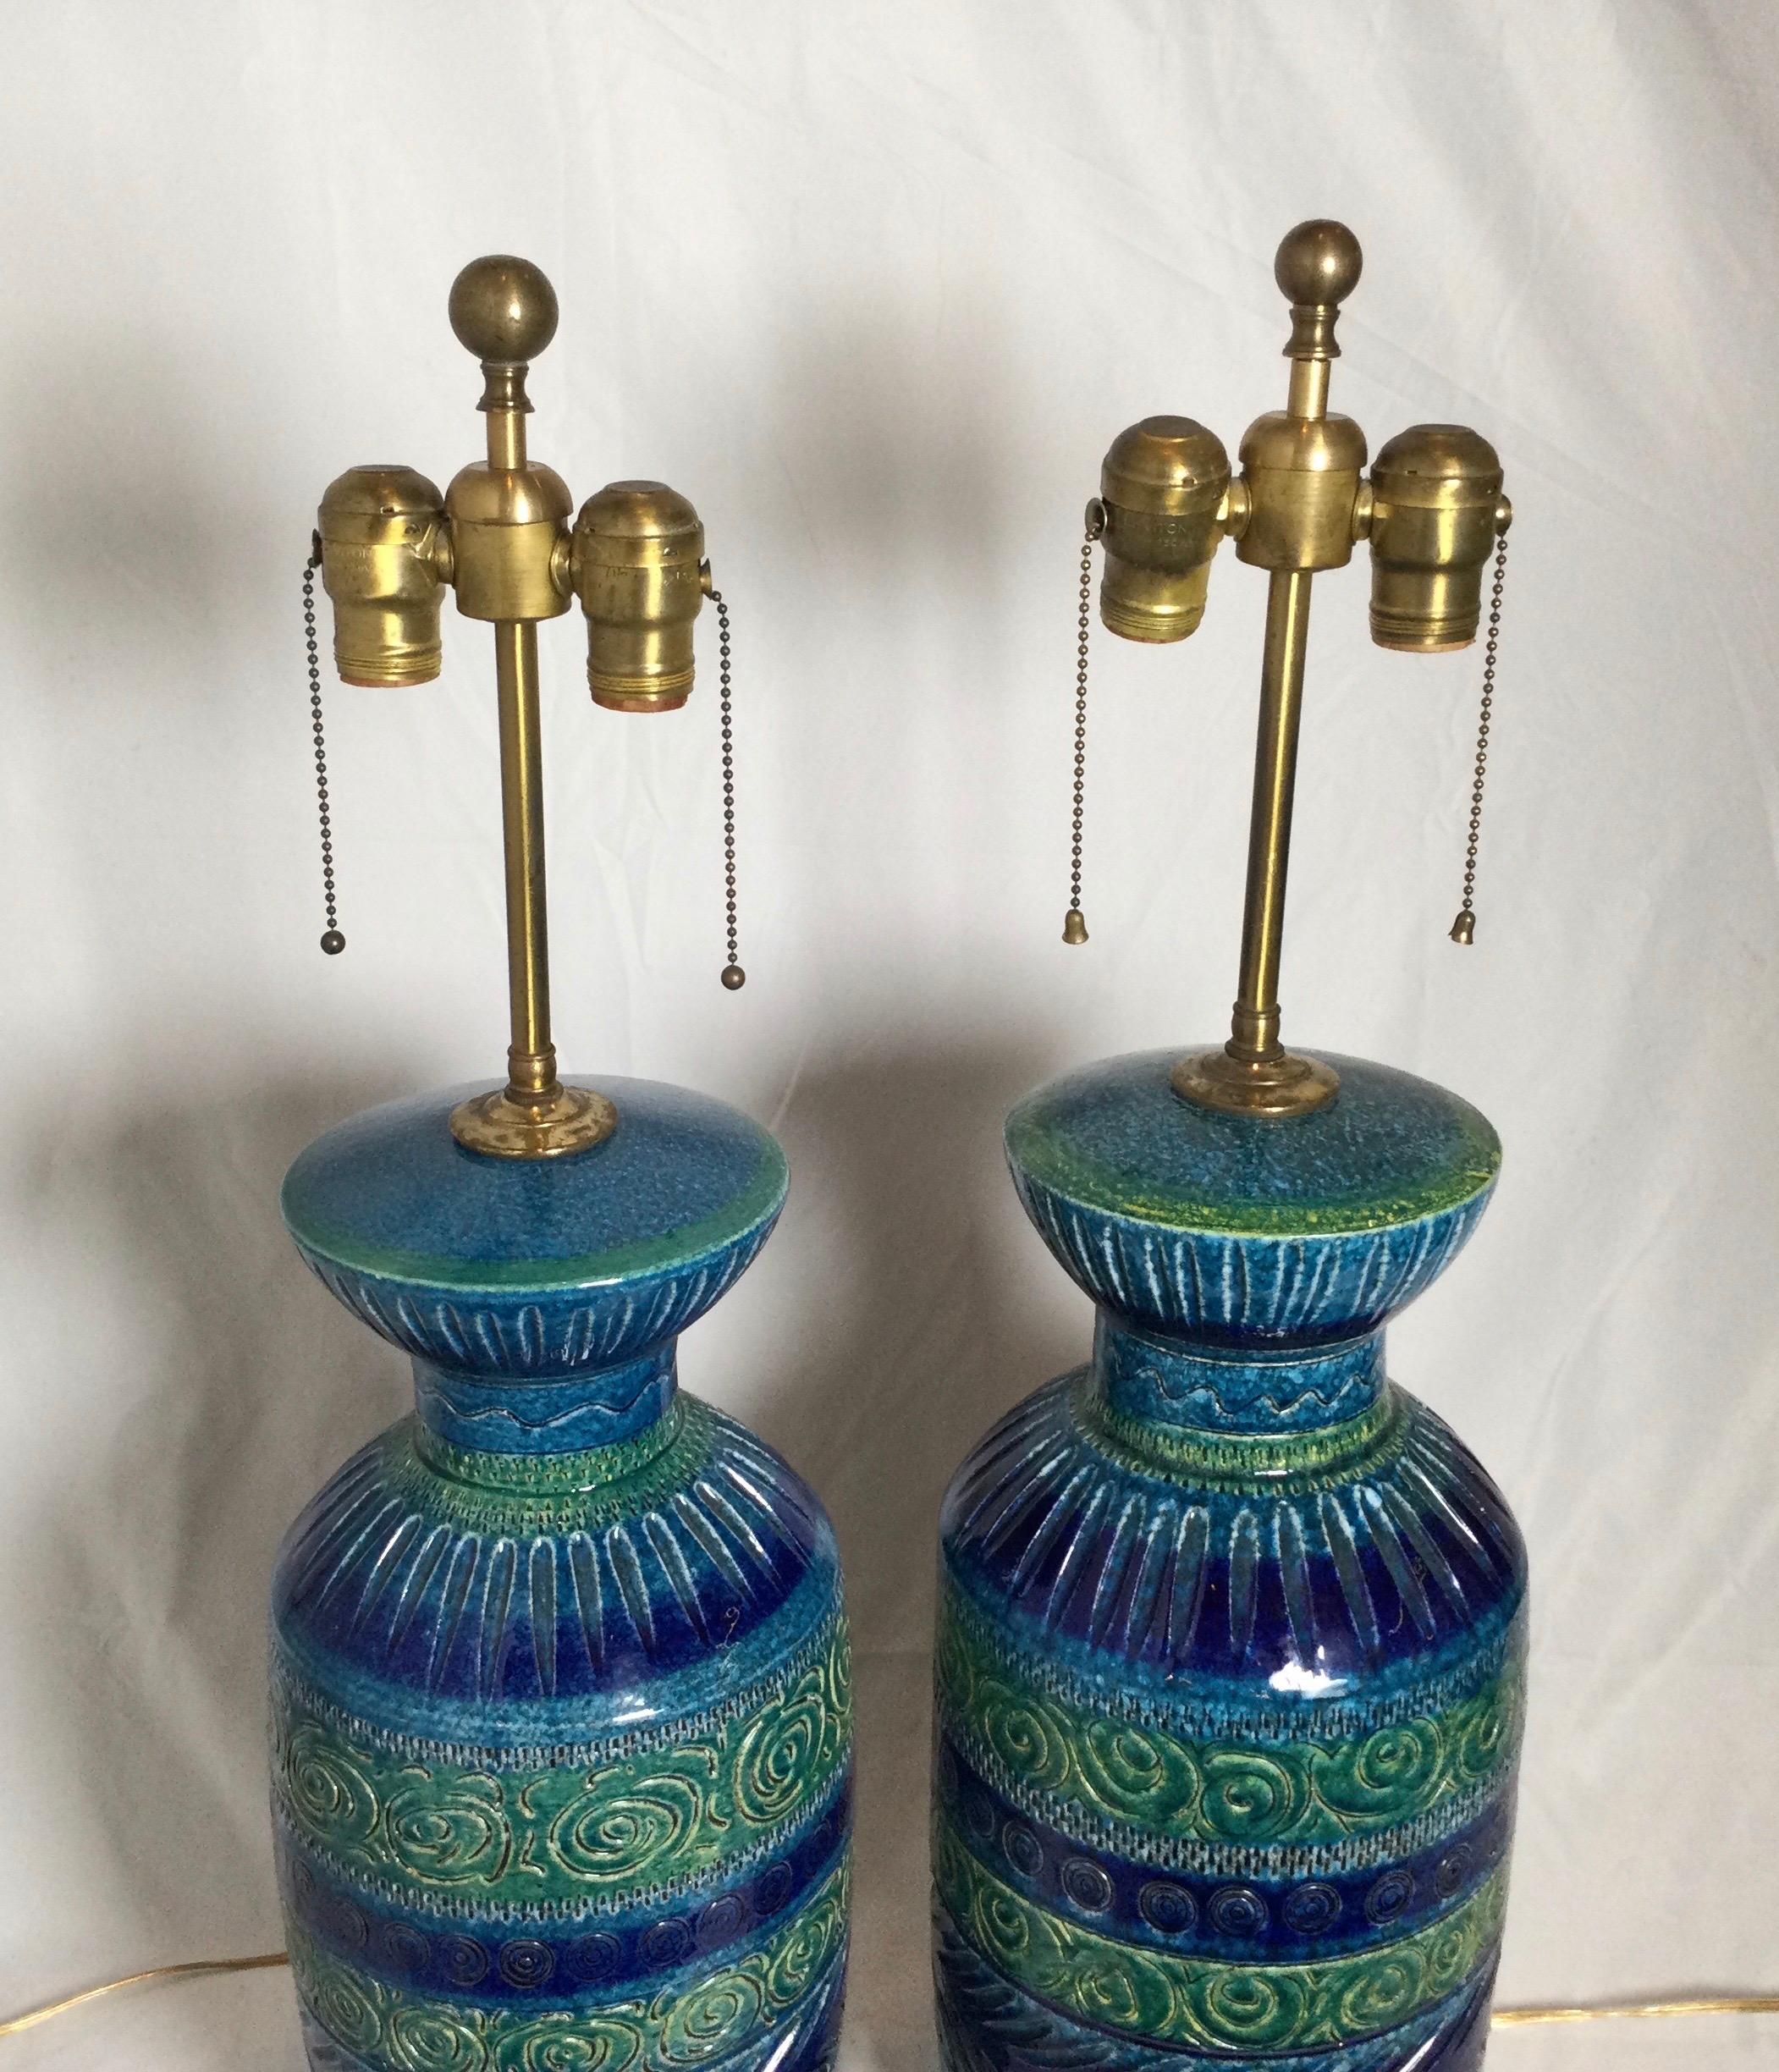 Pair of Aldo Londi Bitossi midcentury ceramic lamps. Handmade, slightly different from one another. Each carved in to the ceramic, wonderful colors. Measures: Approximately 8